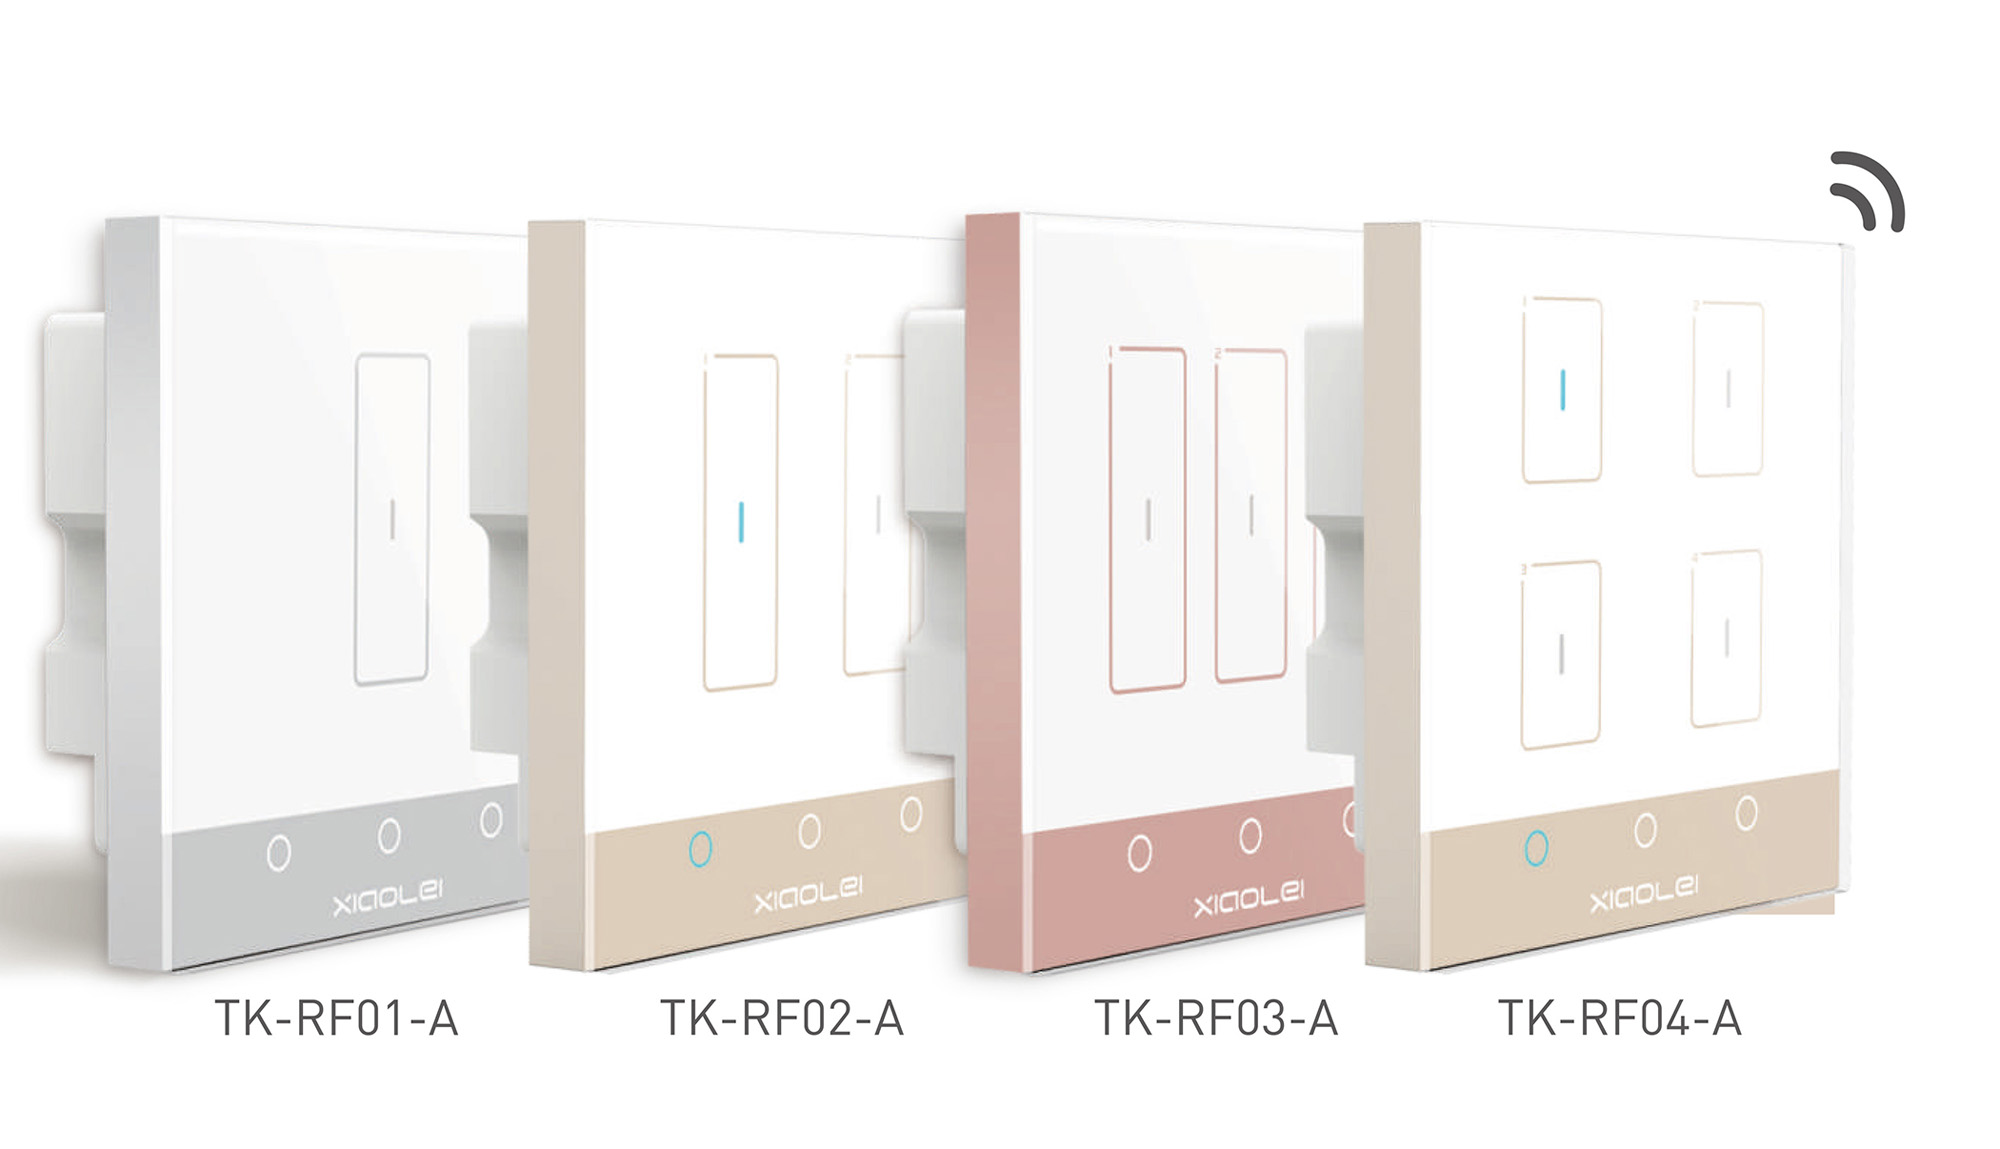 TK-RF01-A  Ltech Smart wireless Touch switch, 1 Chanel x 200W max per channel, RF 2.4GHz, 100-240Vac input, Smart gate way compatible, IP20.